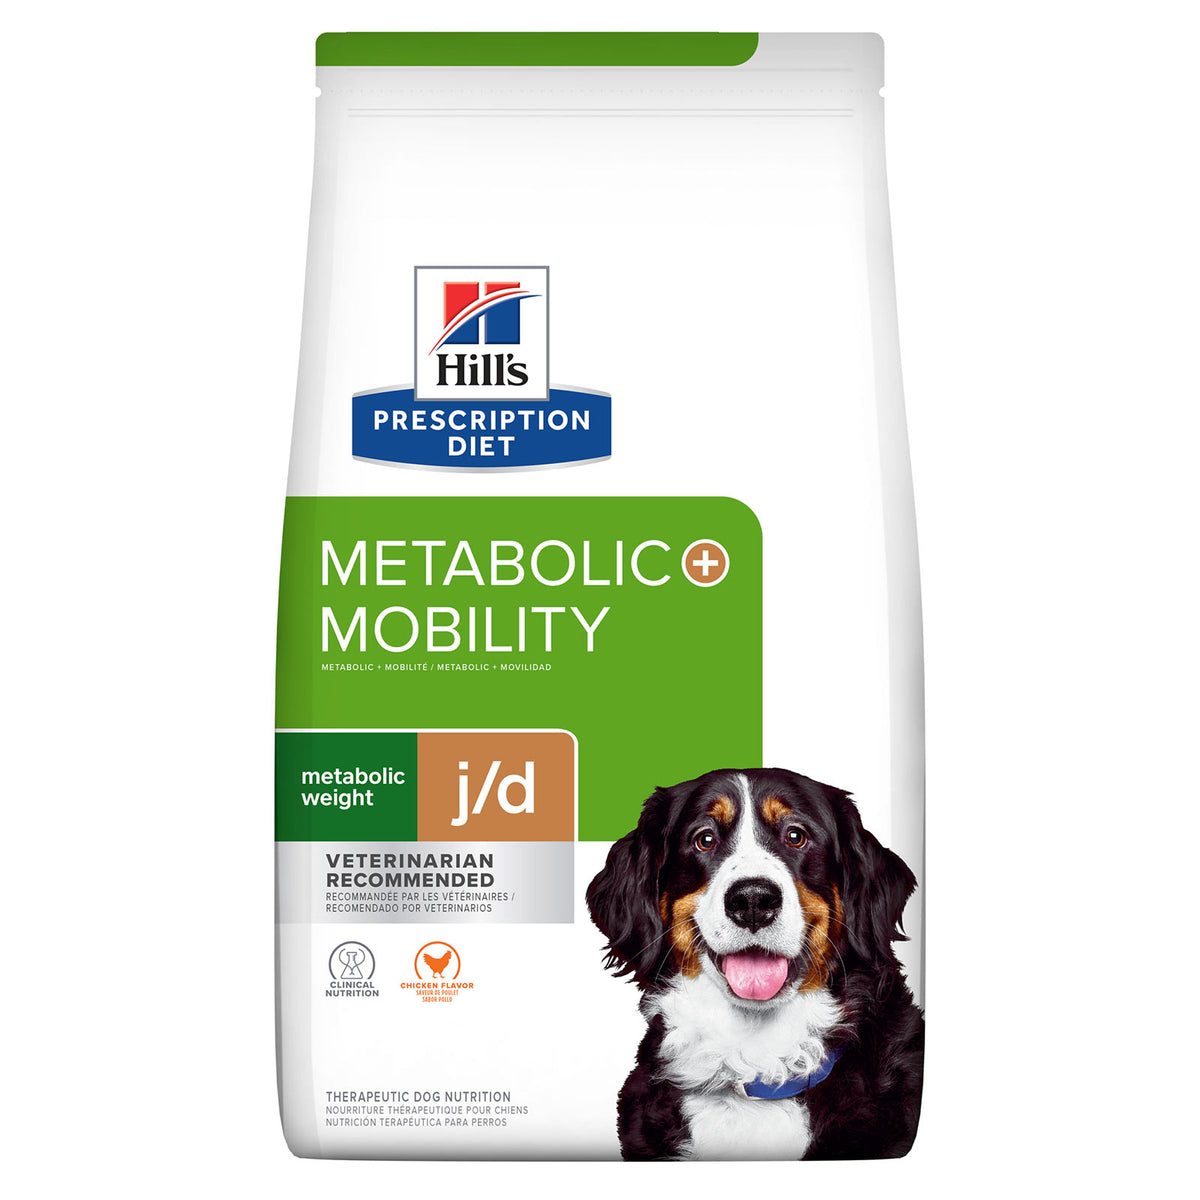 Hill's Prescription Diet Metabolic  Mobility Joint/Weight Loss Dog Dry